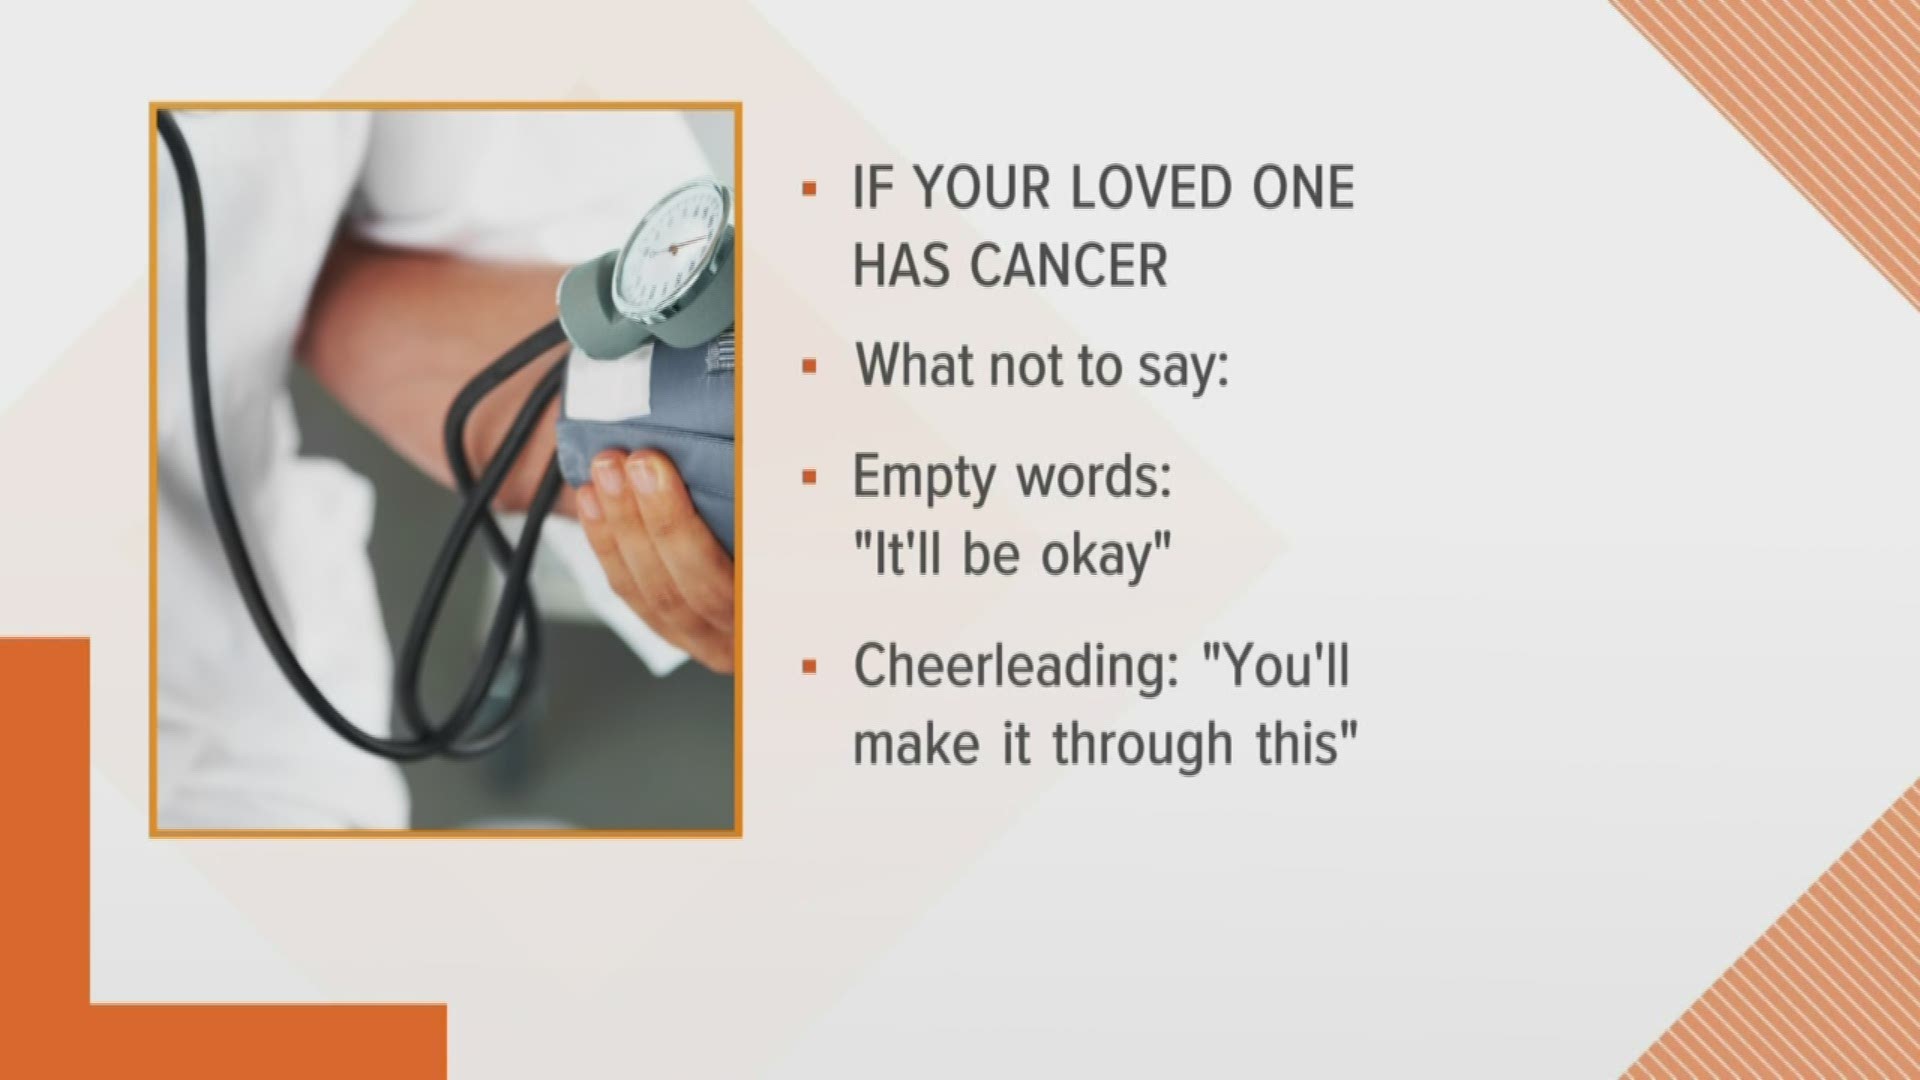 Psychiatrist Dr. Victoria Kelly shares some insight on what to do if a loved one is diagnosed with cancer.